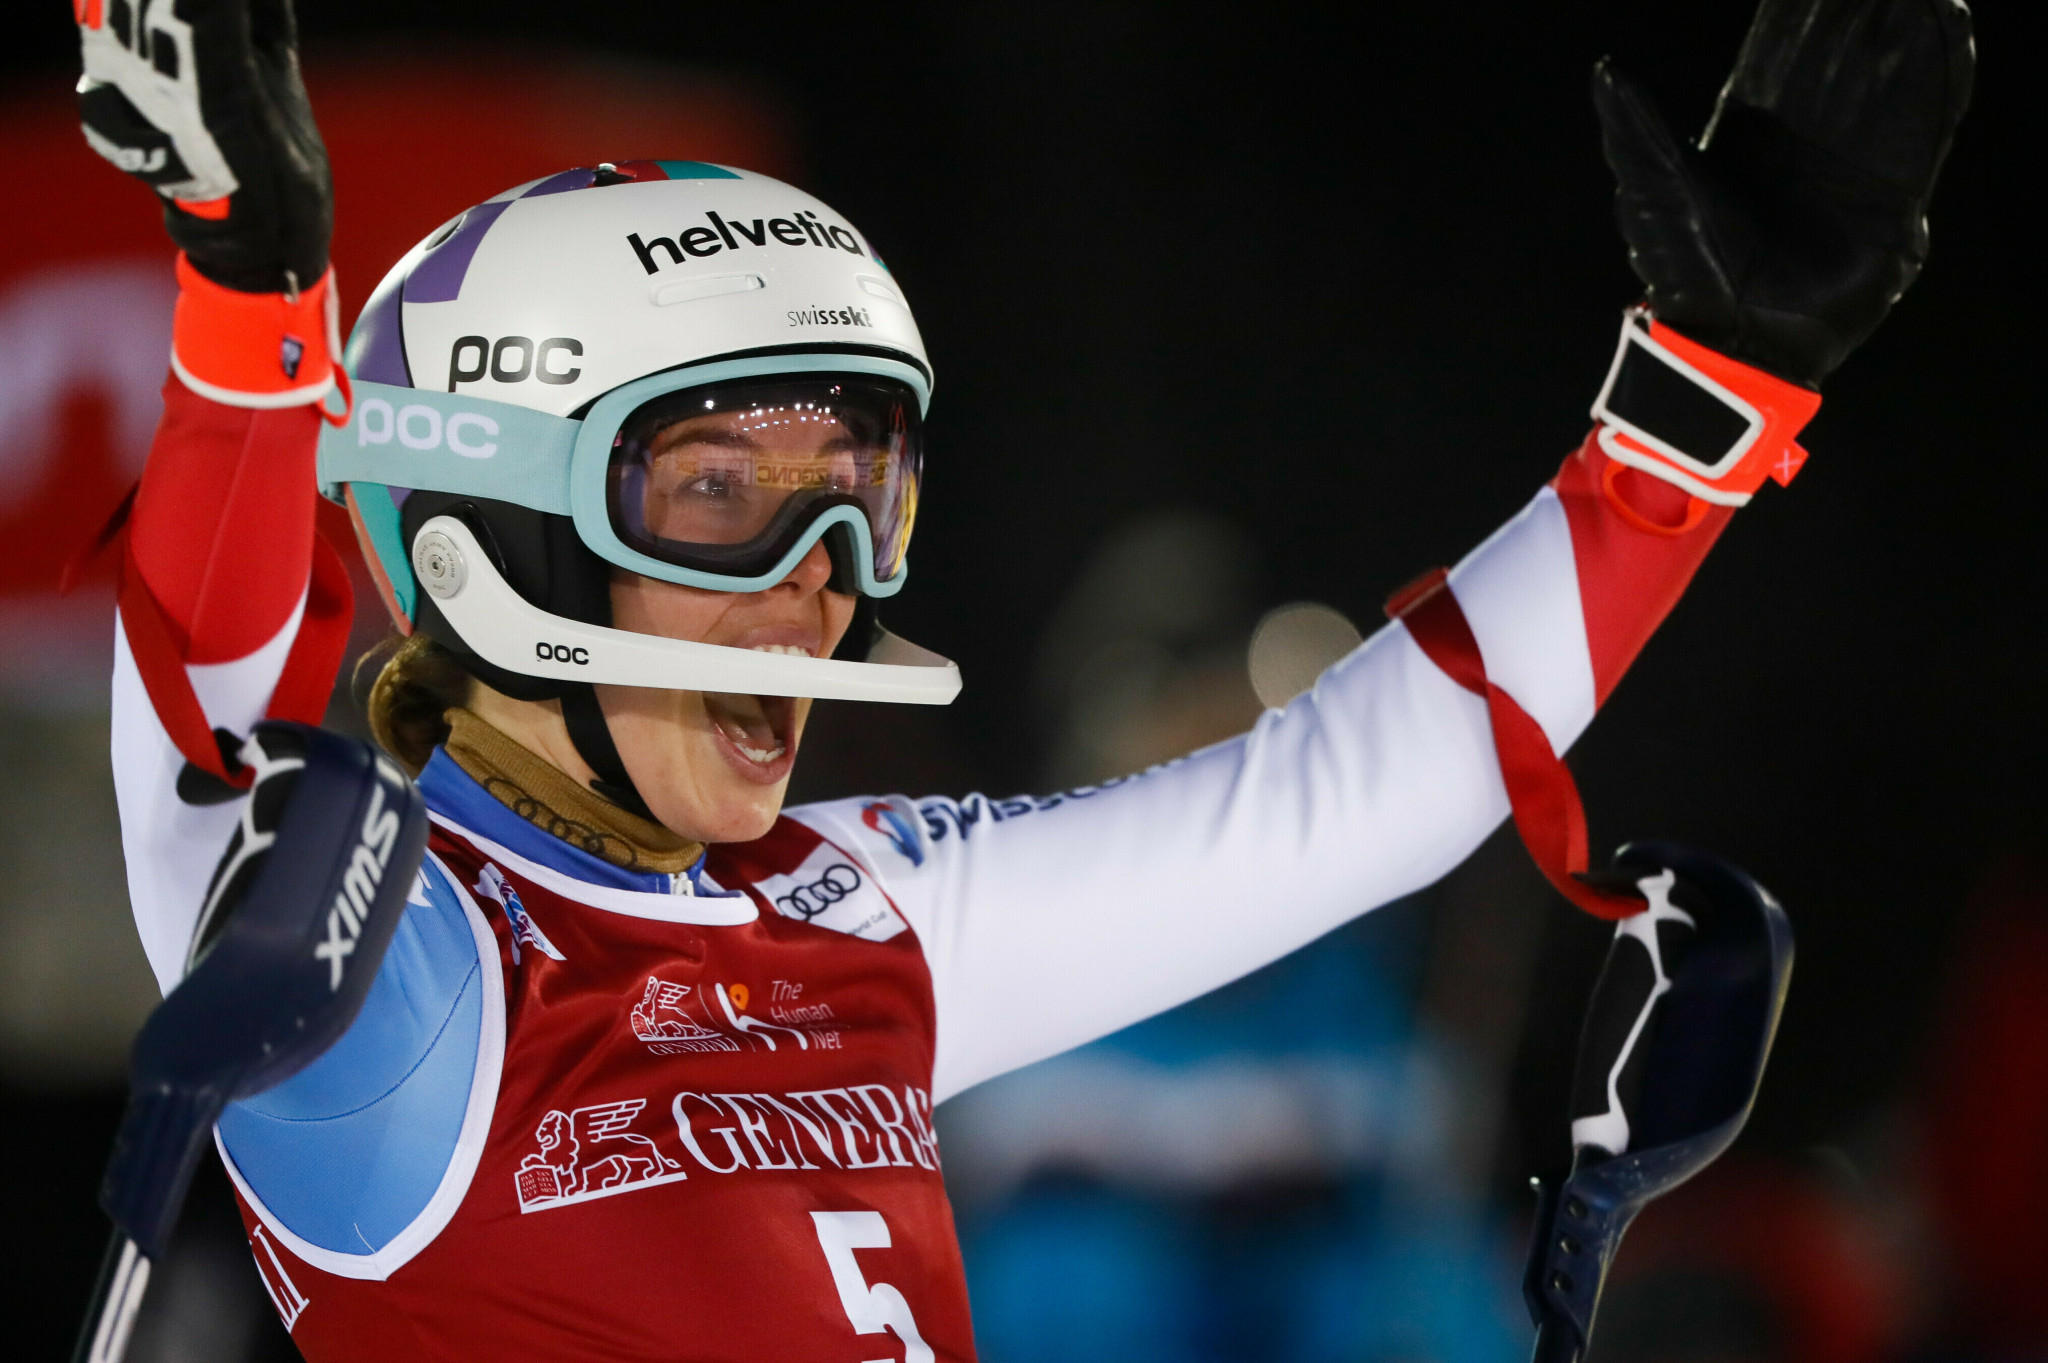 Michelle Gisin matched her best-ever slalom performance in the FIS Alpine Ski World Cup ©Getty Images